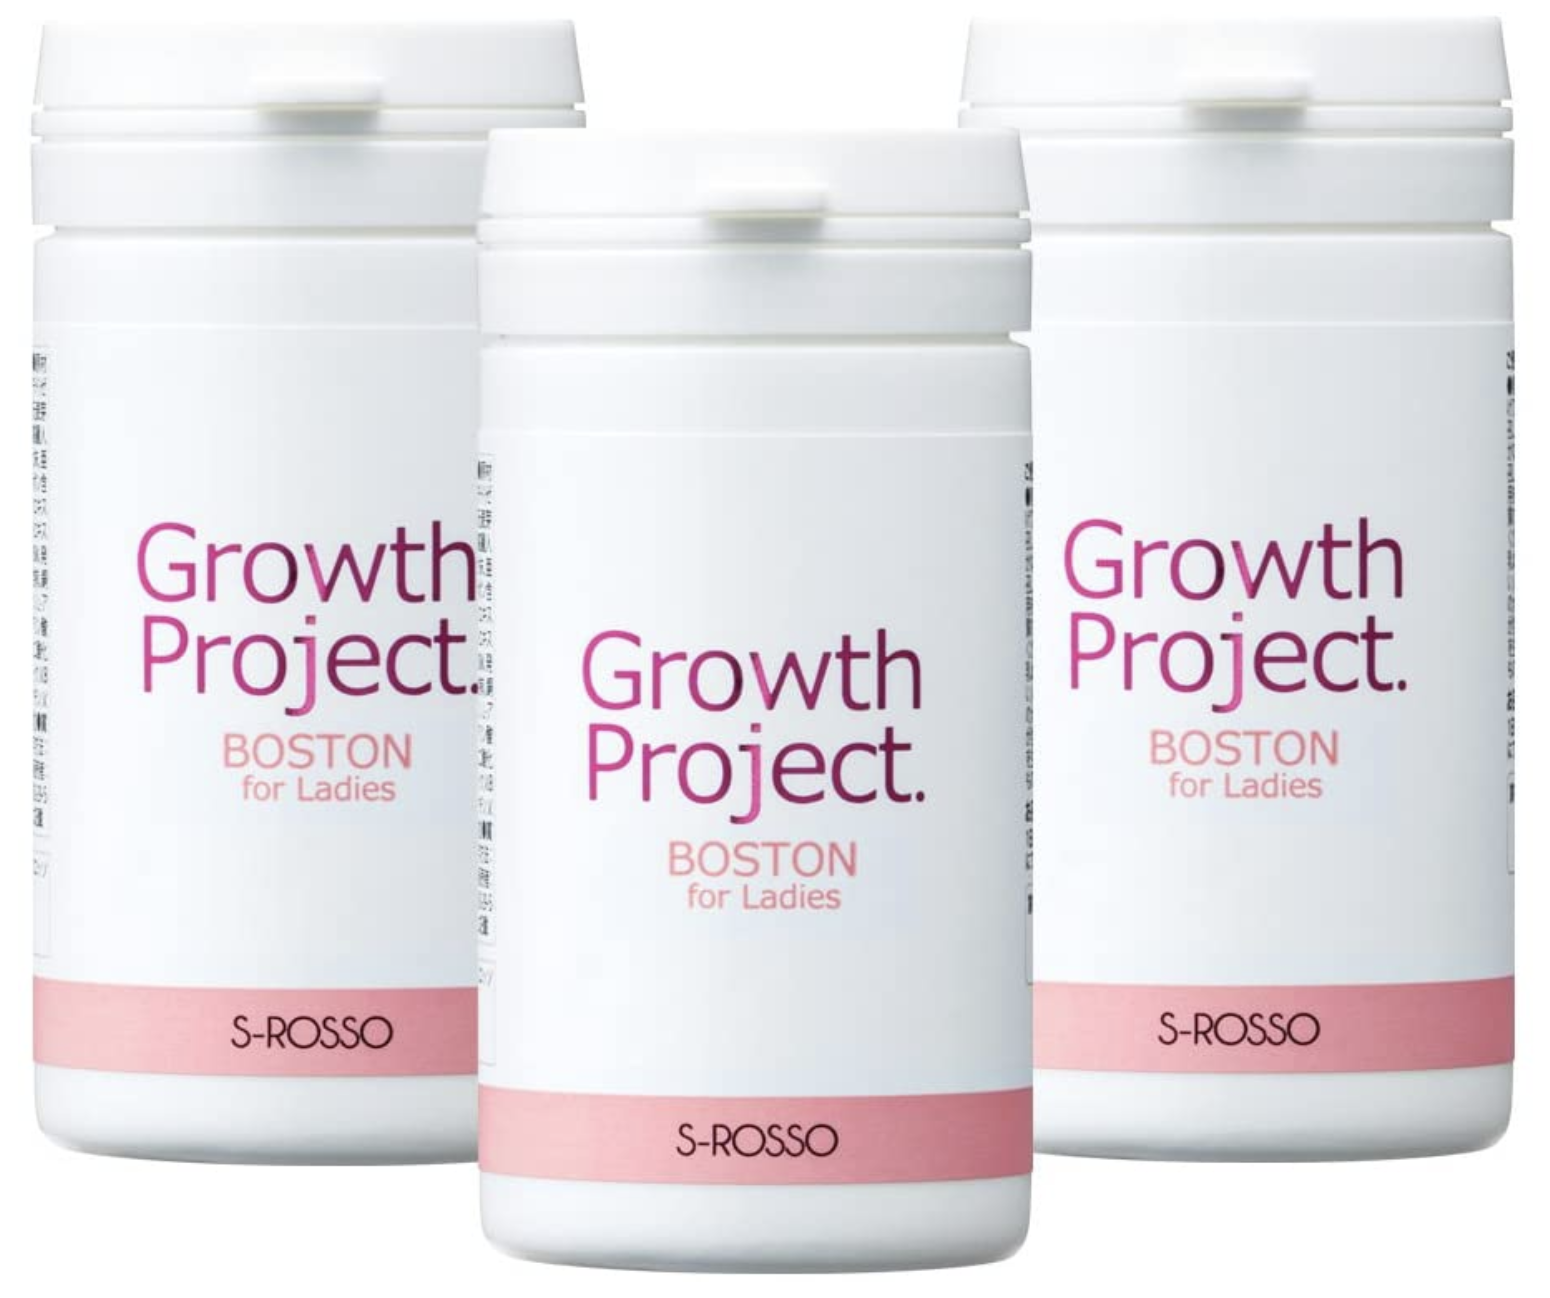 Growth Project BOSTON for Ladies